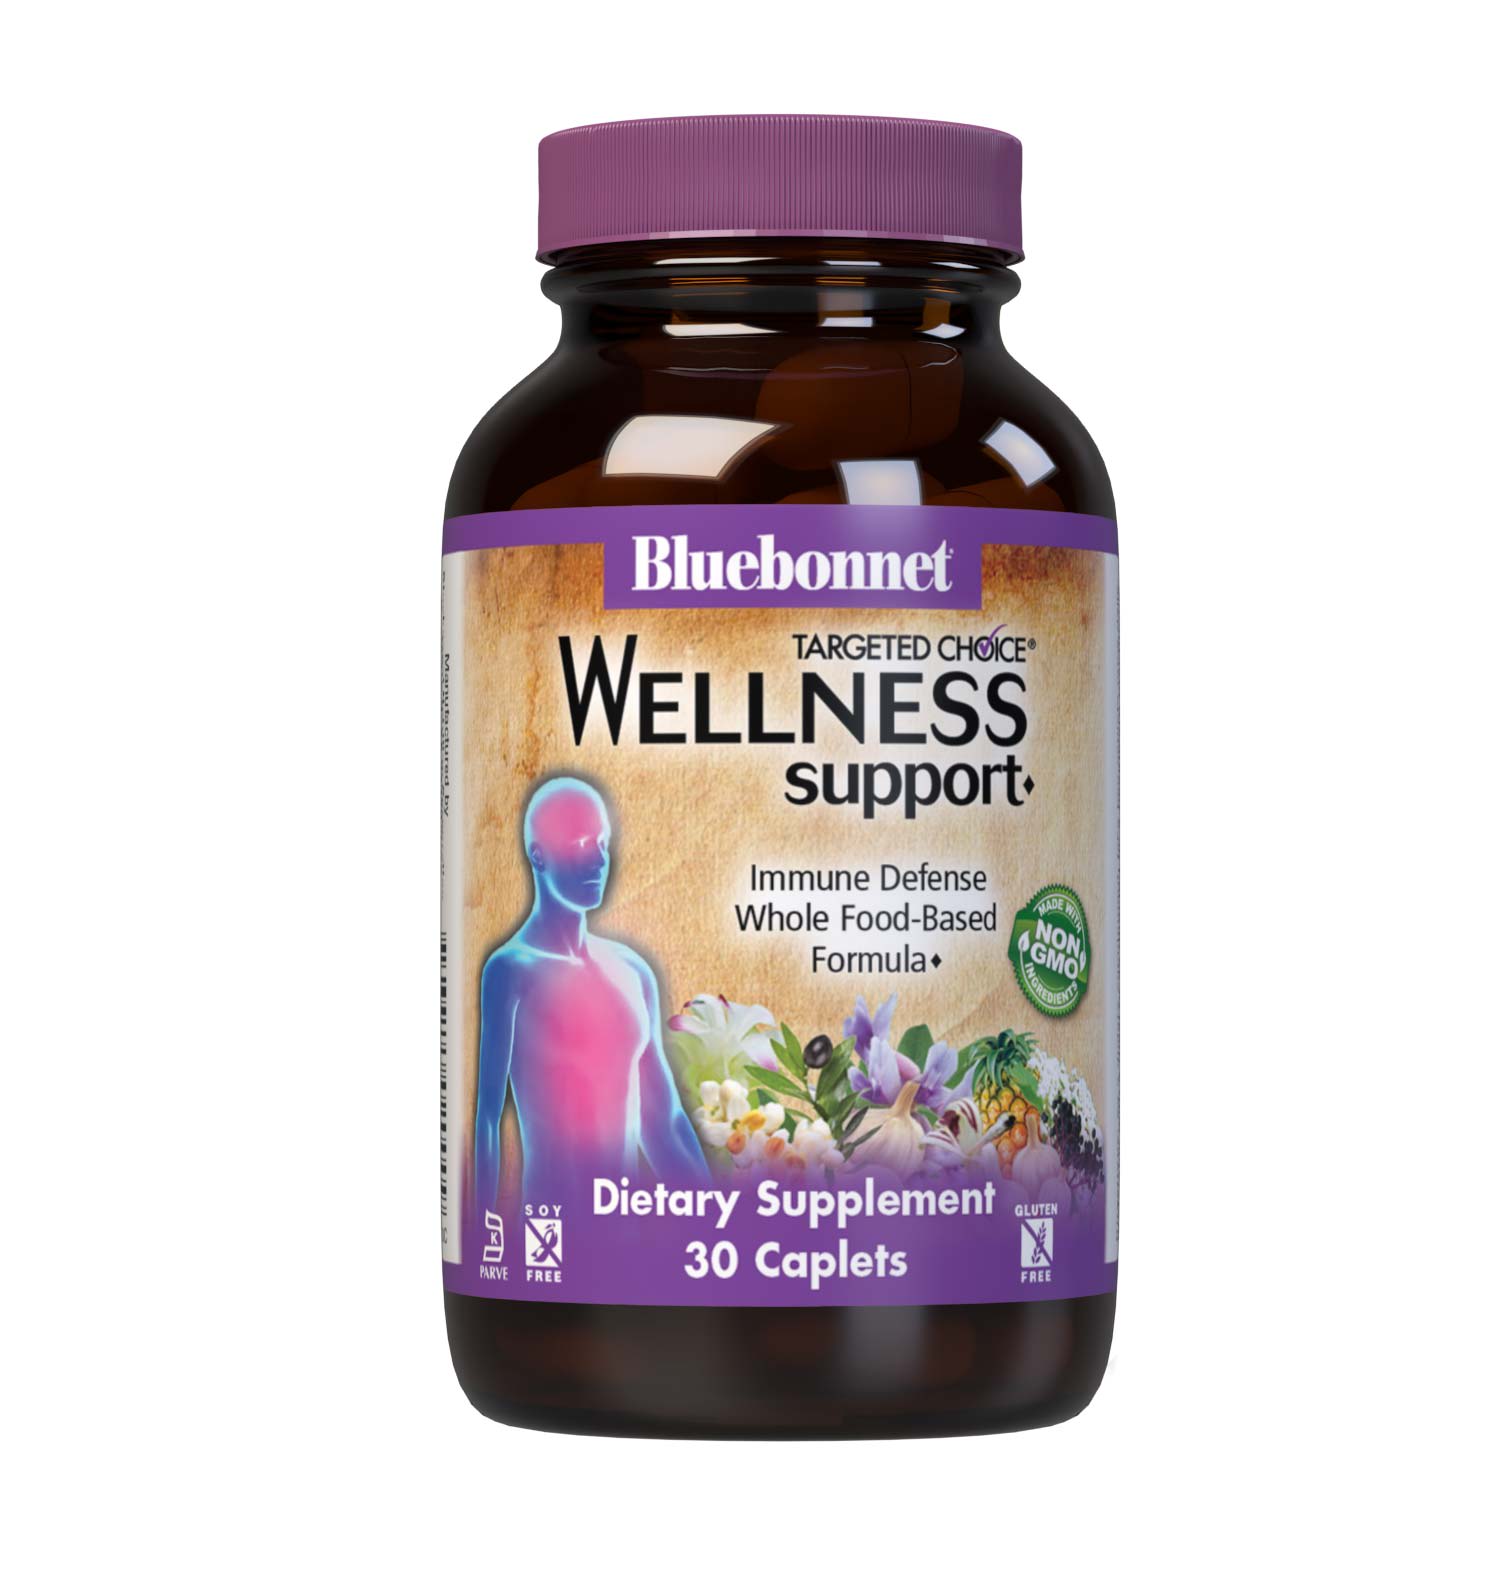 Bluebonnet’s Targeted Choice Wellness Support 30 Caplets are formulated with a complementary combination of non-GMO nutrients and sustainably sourced herbal extracts, such as vitamins A, C & D3, NAC, quercetin, zinc, andrographis, astragalus, elderberry, odor-less garlic, olive leaf, stinging nettle and turmeric.  #size_30 count